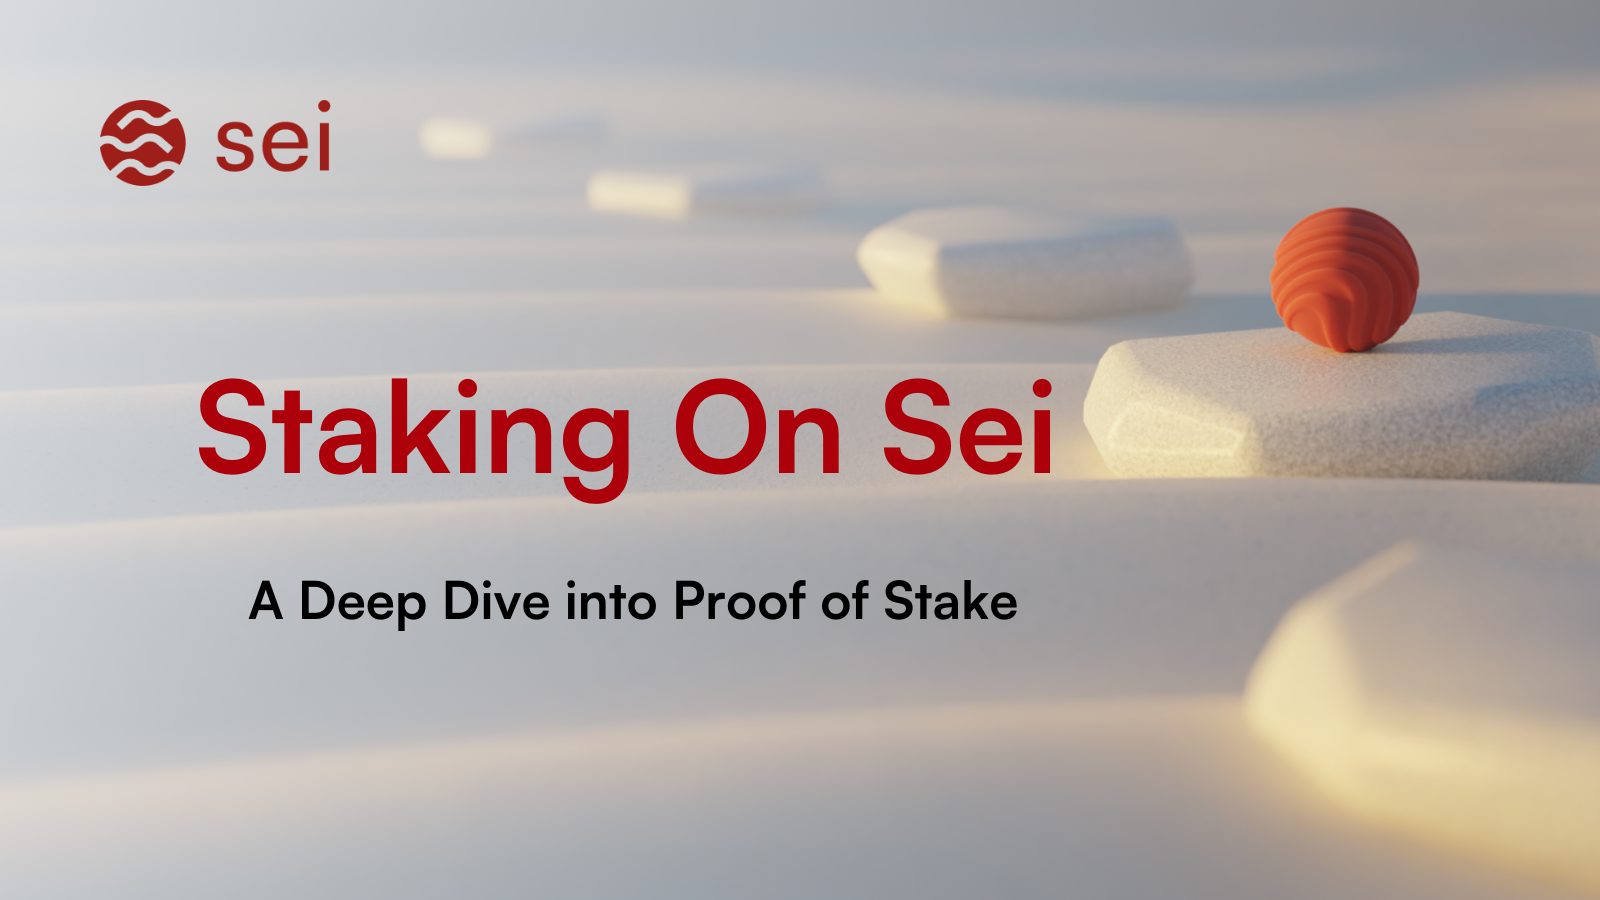 Staking on Sei: What is it?